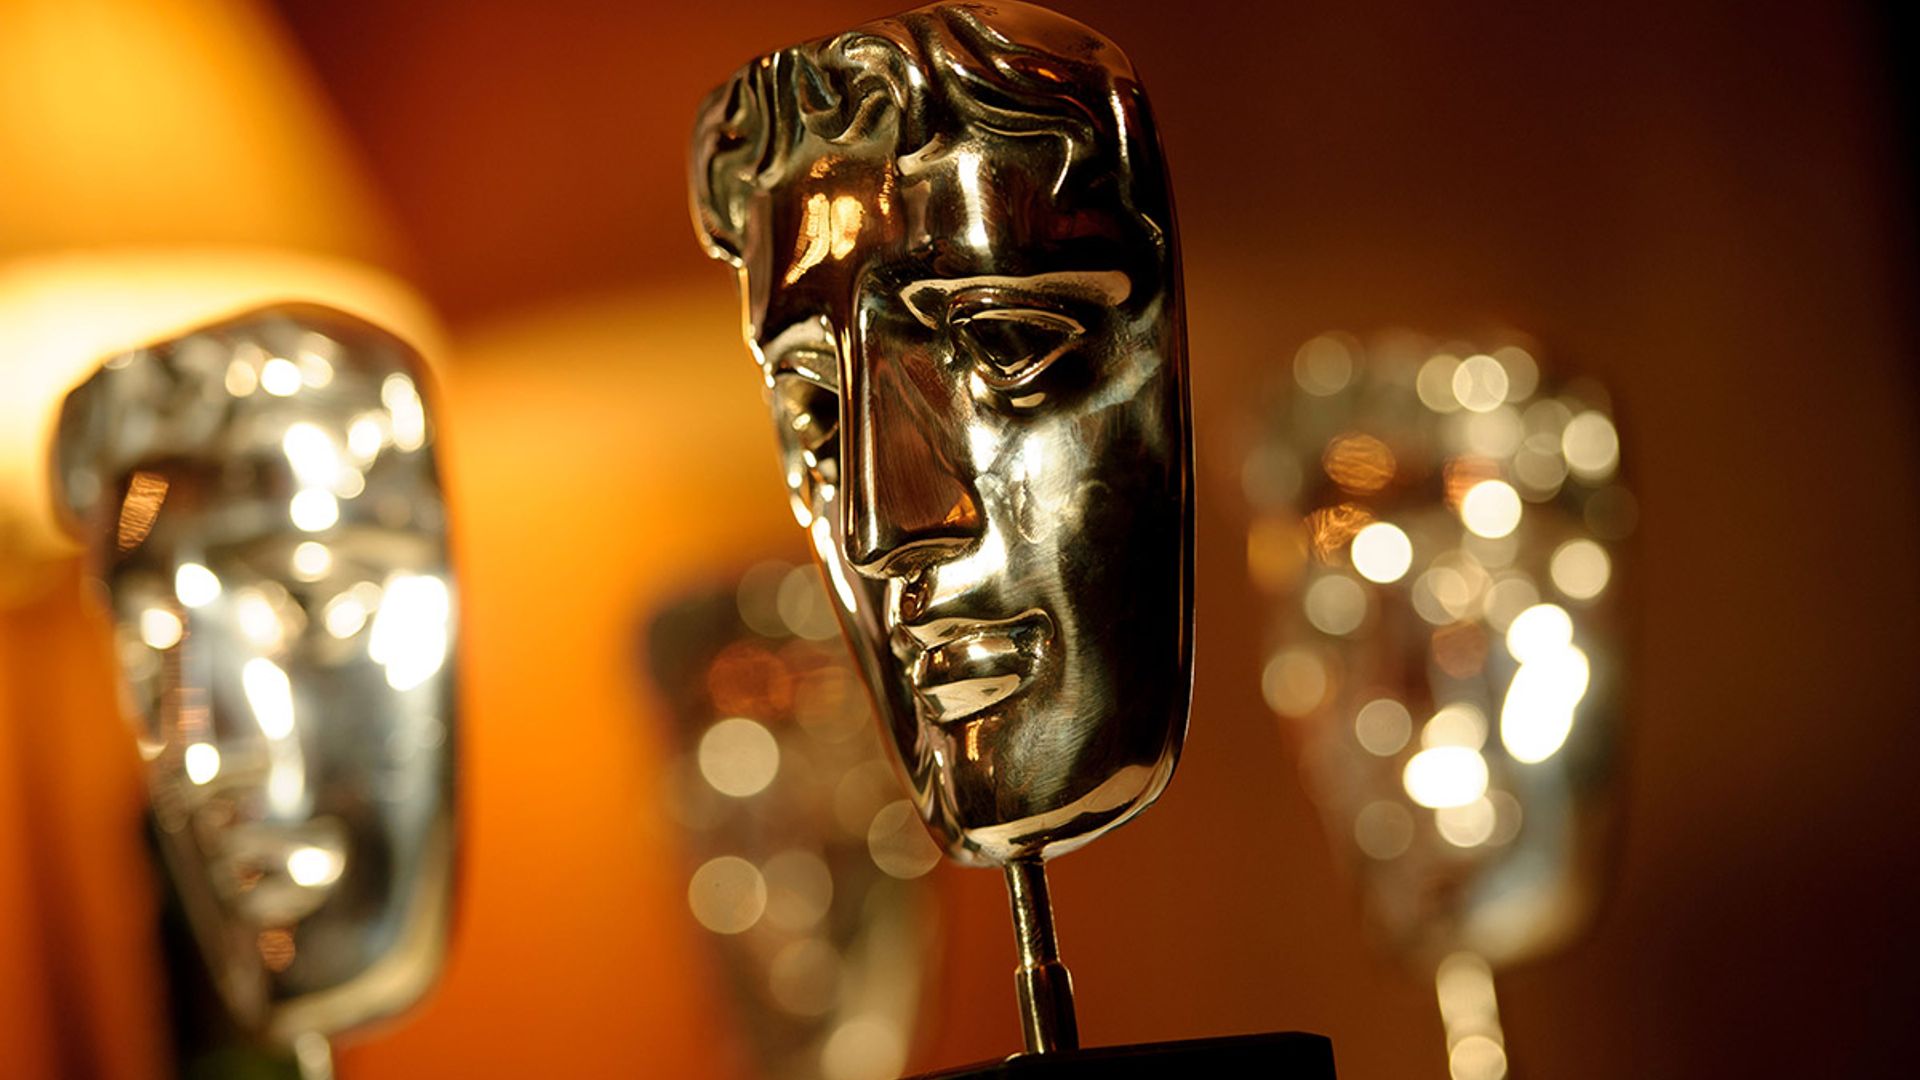 TV BAFTAs 2024: how to watch, who's hosting and timings revealed